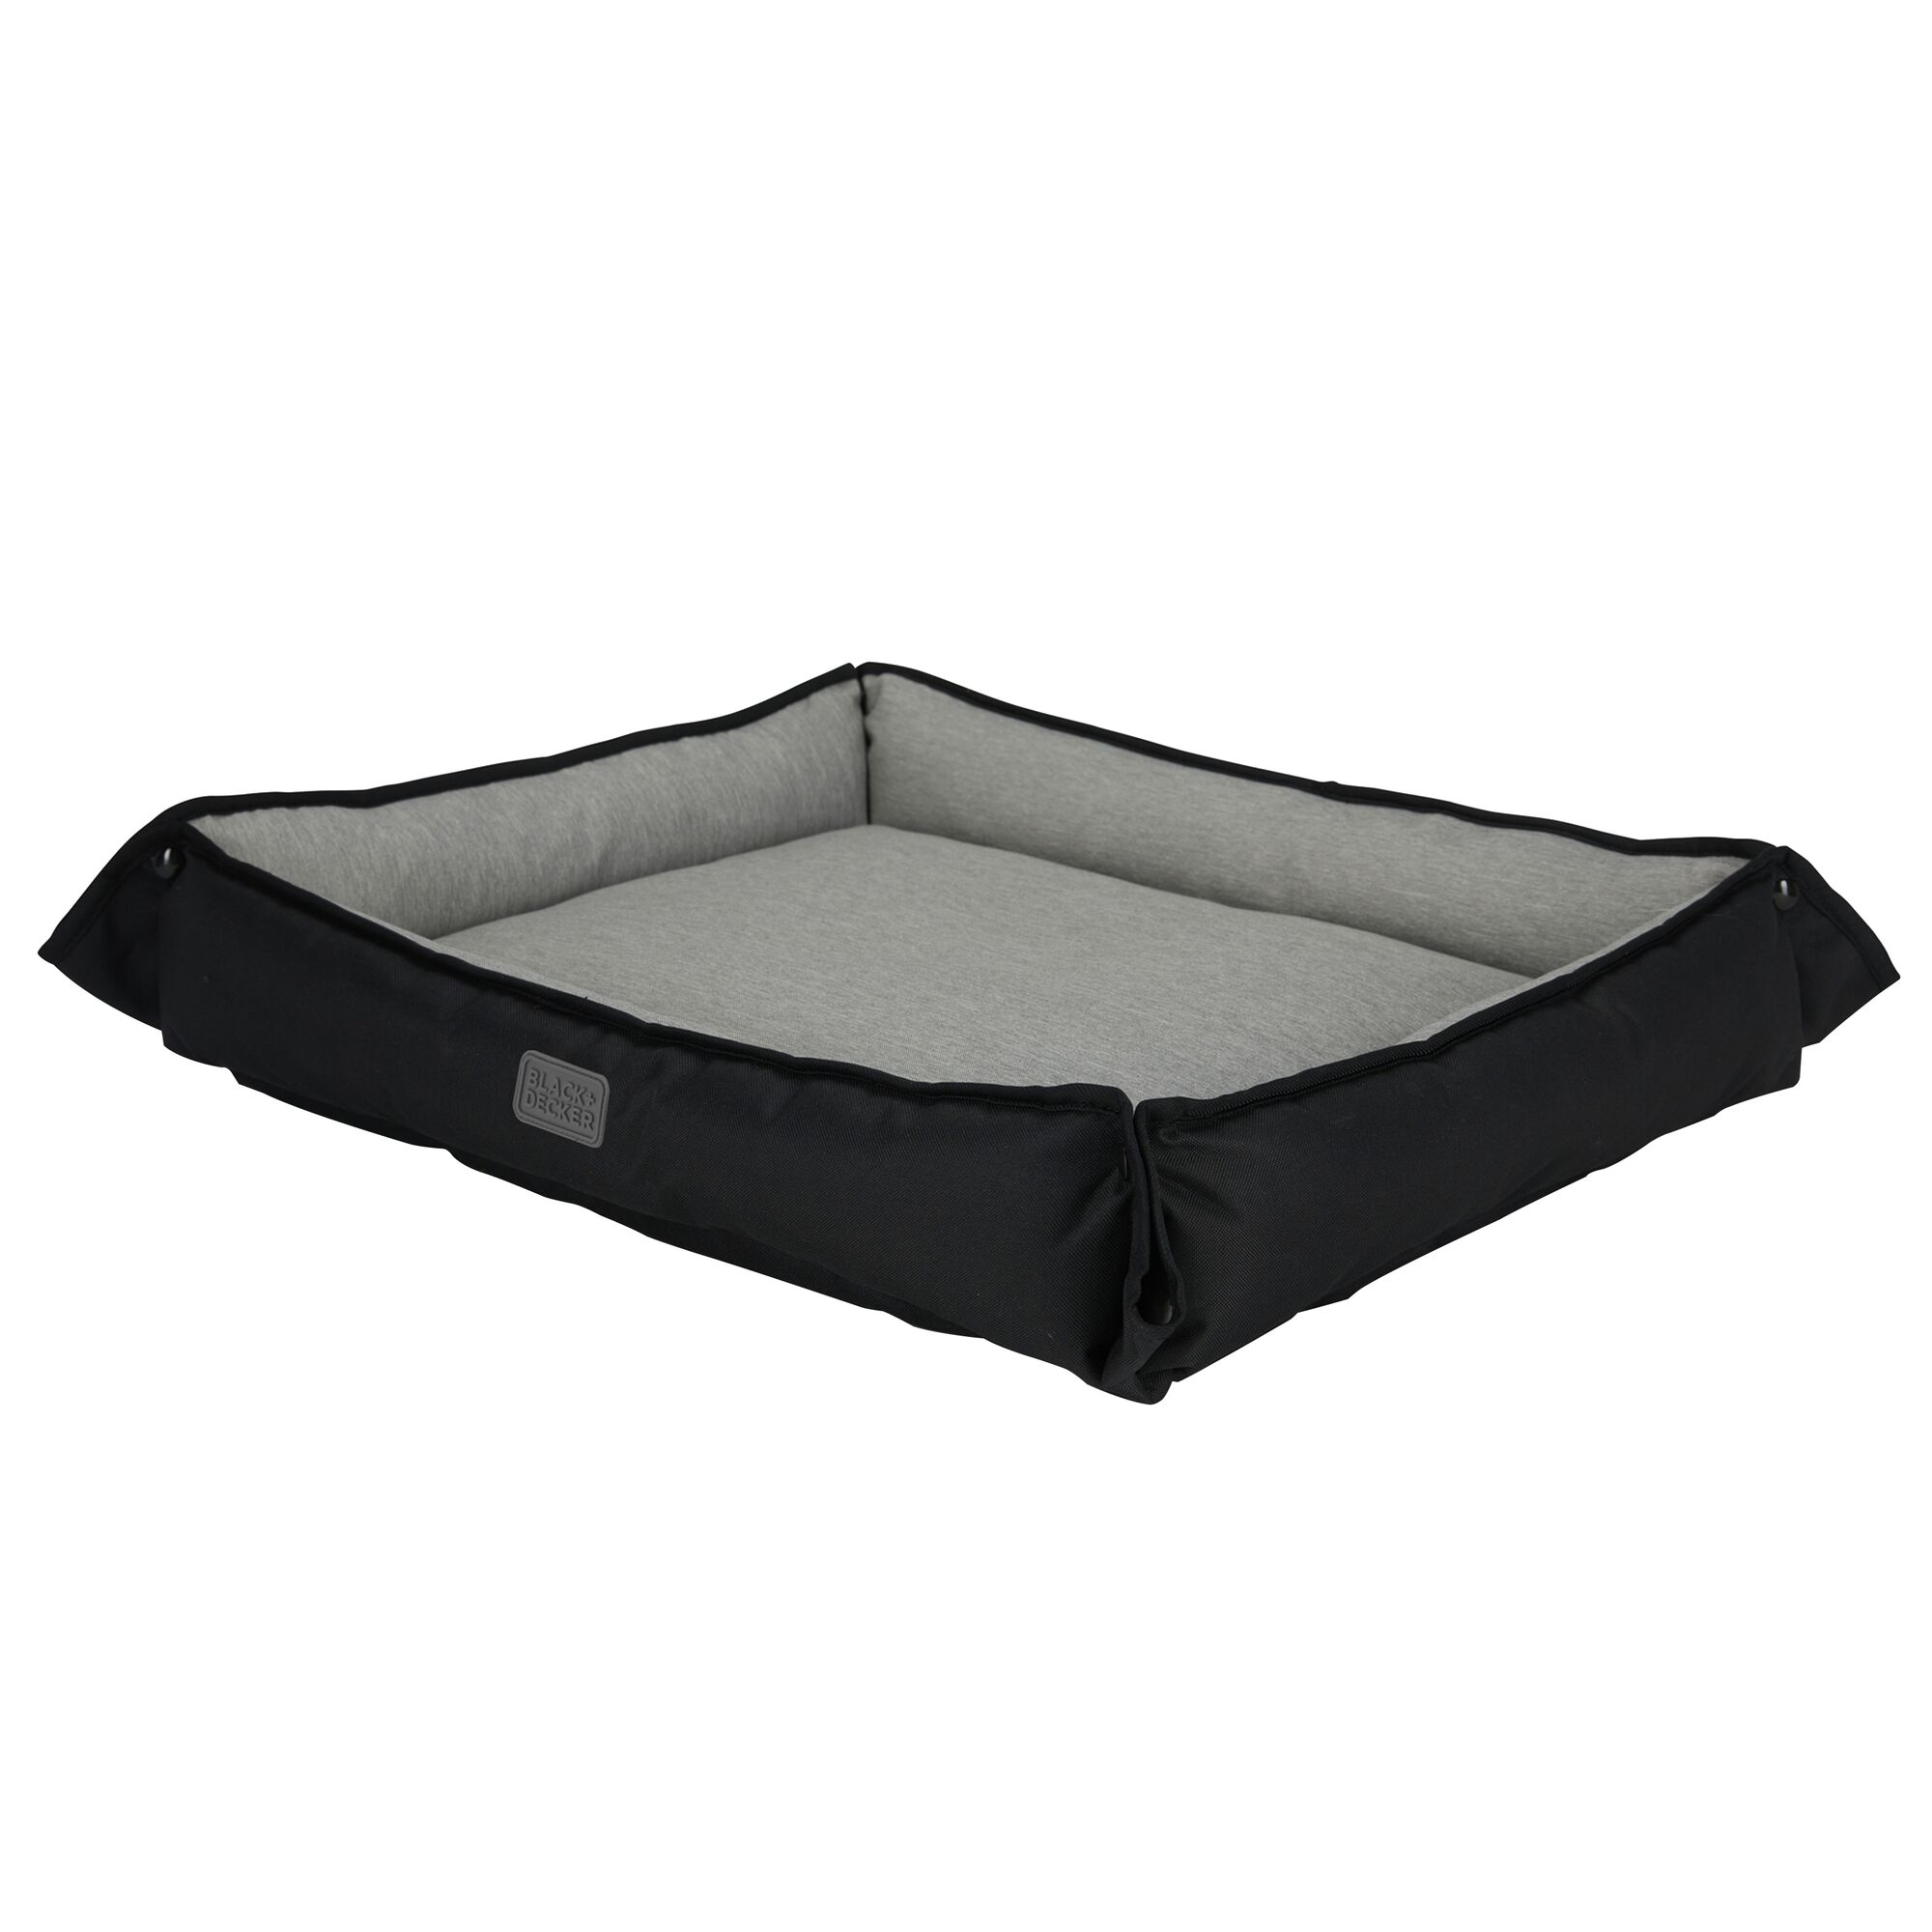 Black plush four sided BLACK+DECKER dog bed shown in profile style but angled to the left